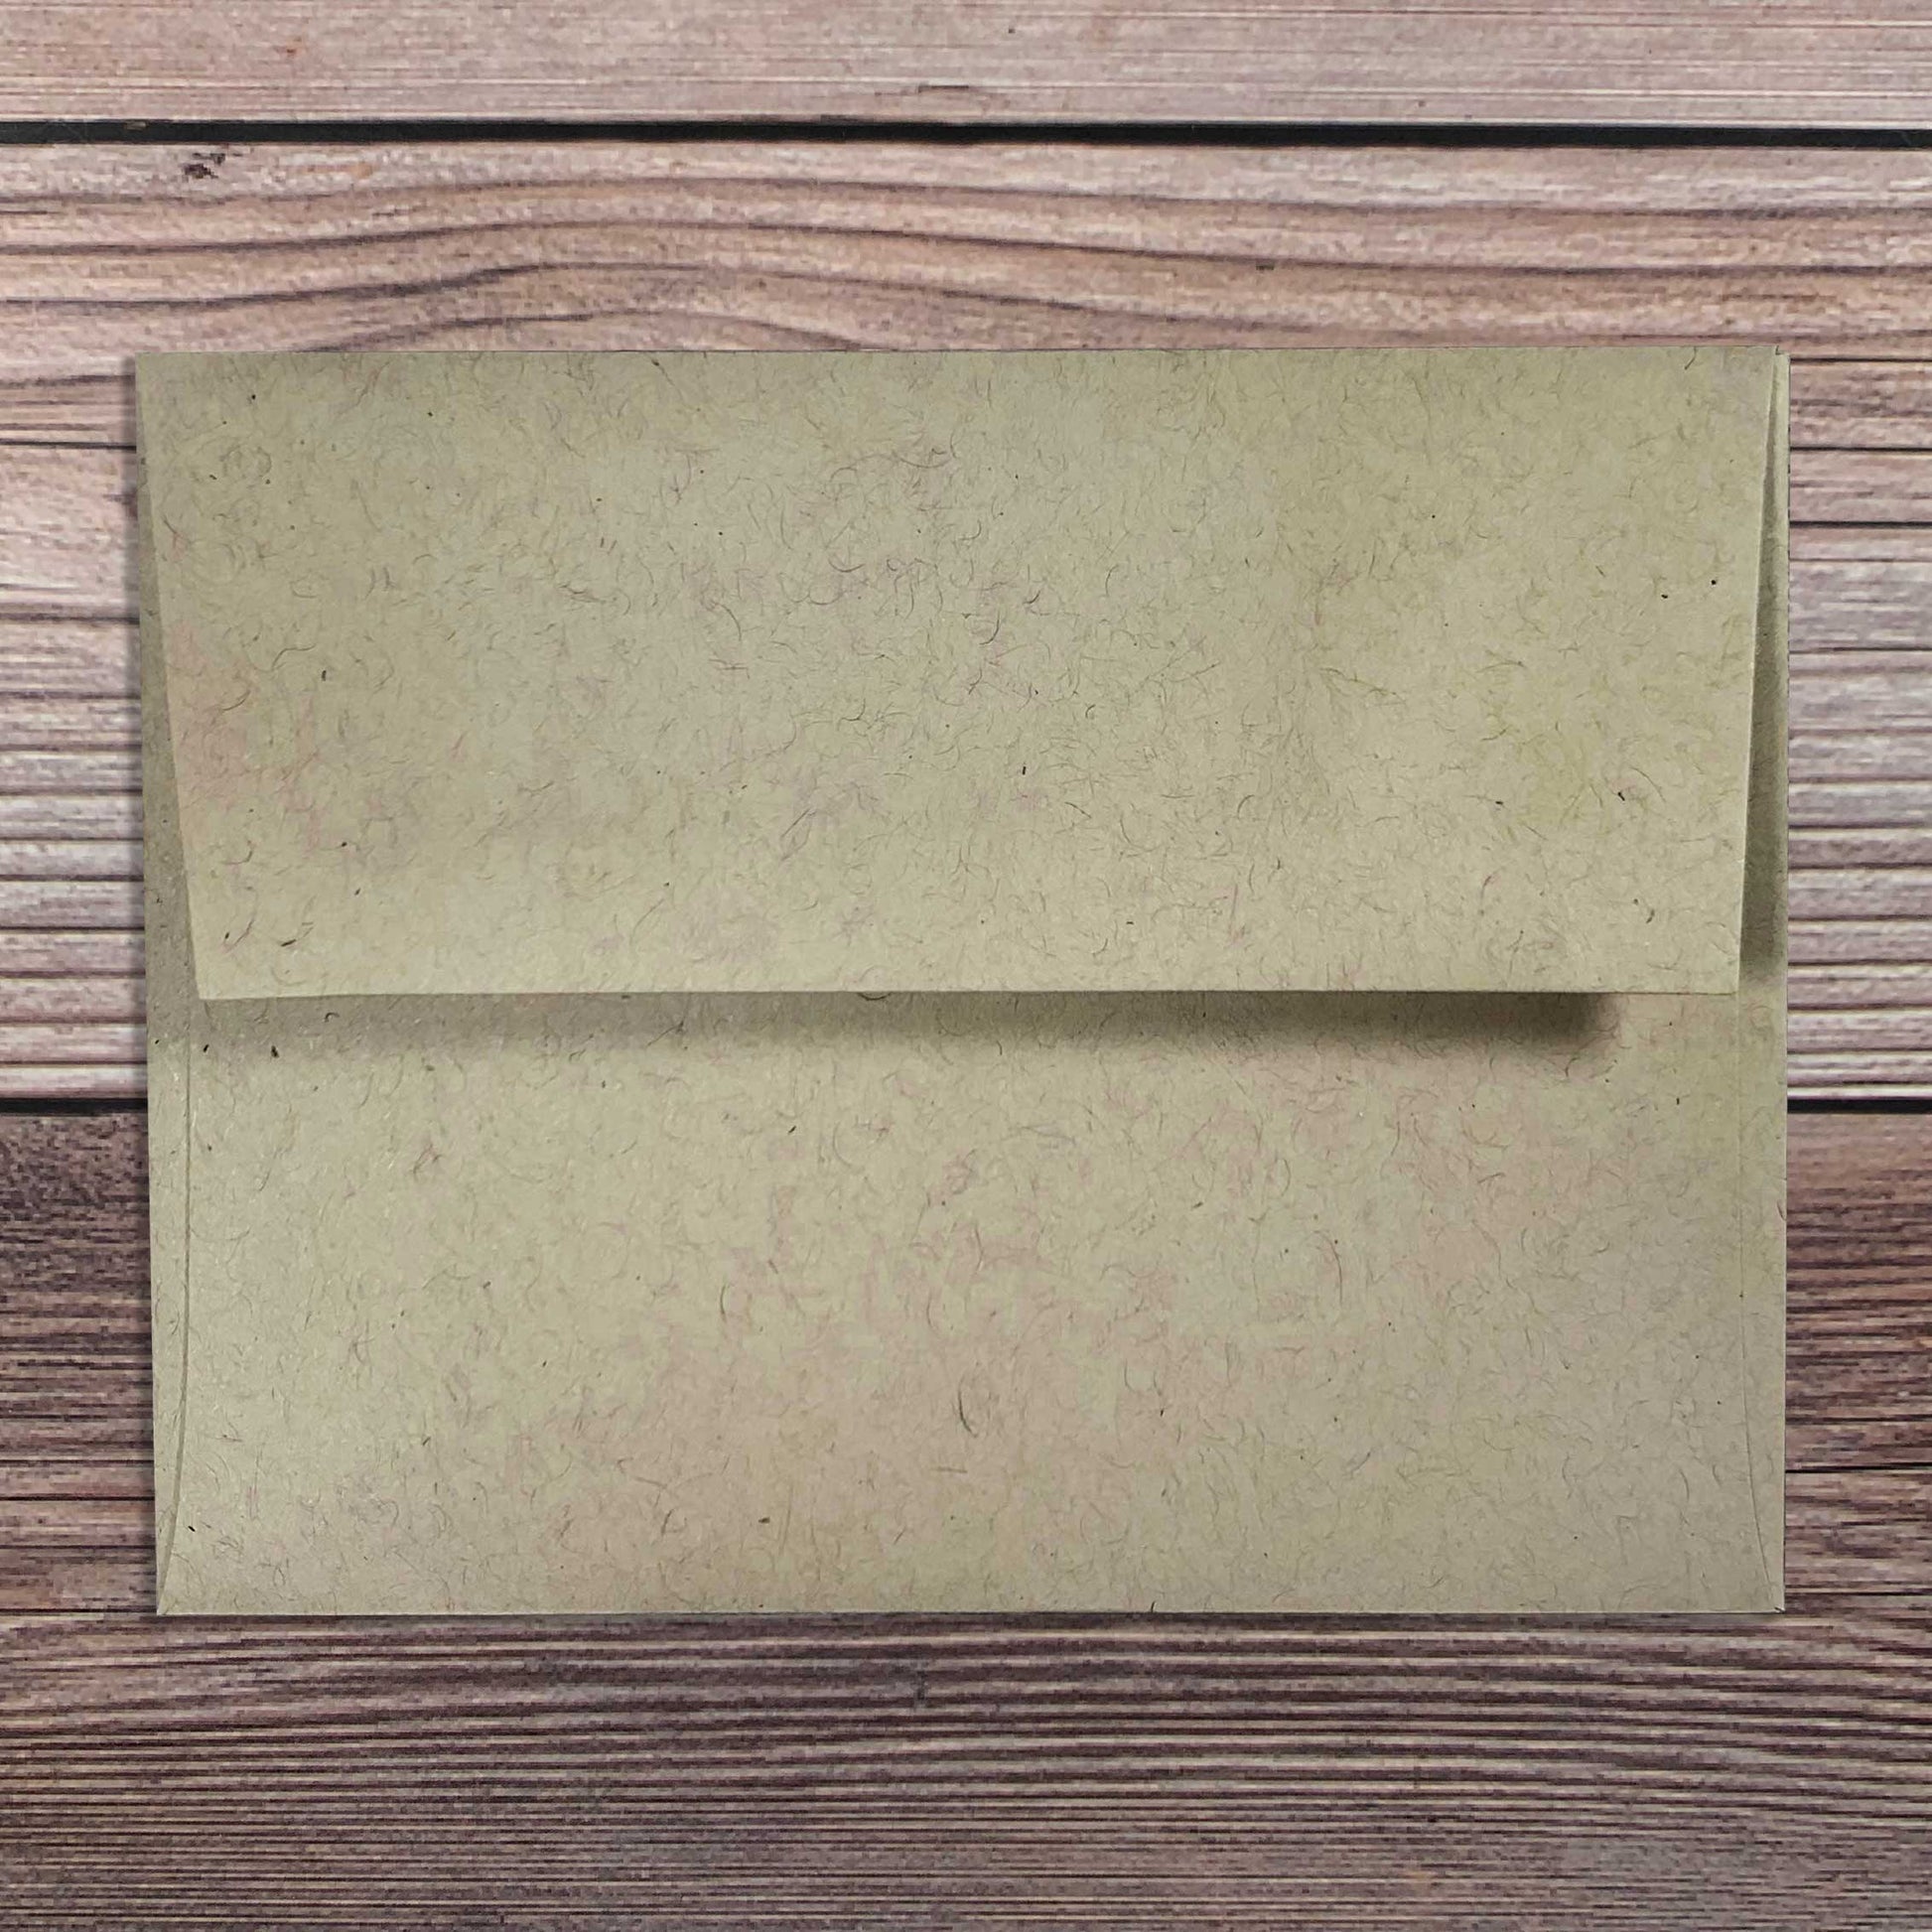 Greeting Card envelope, kraft color, square flap, included with letterpress sympathy and condolence card.